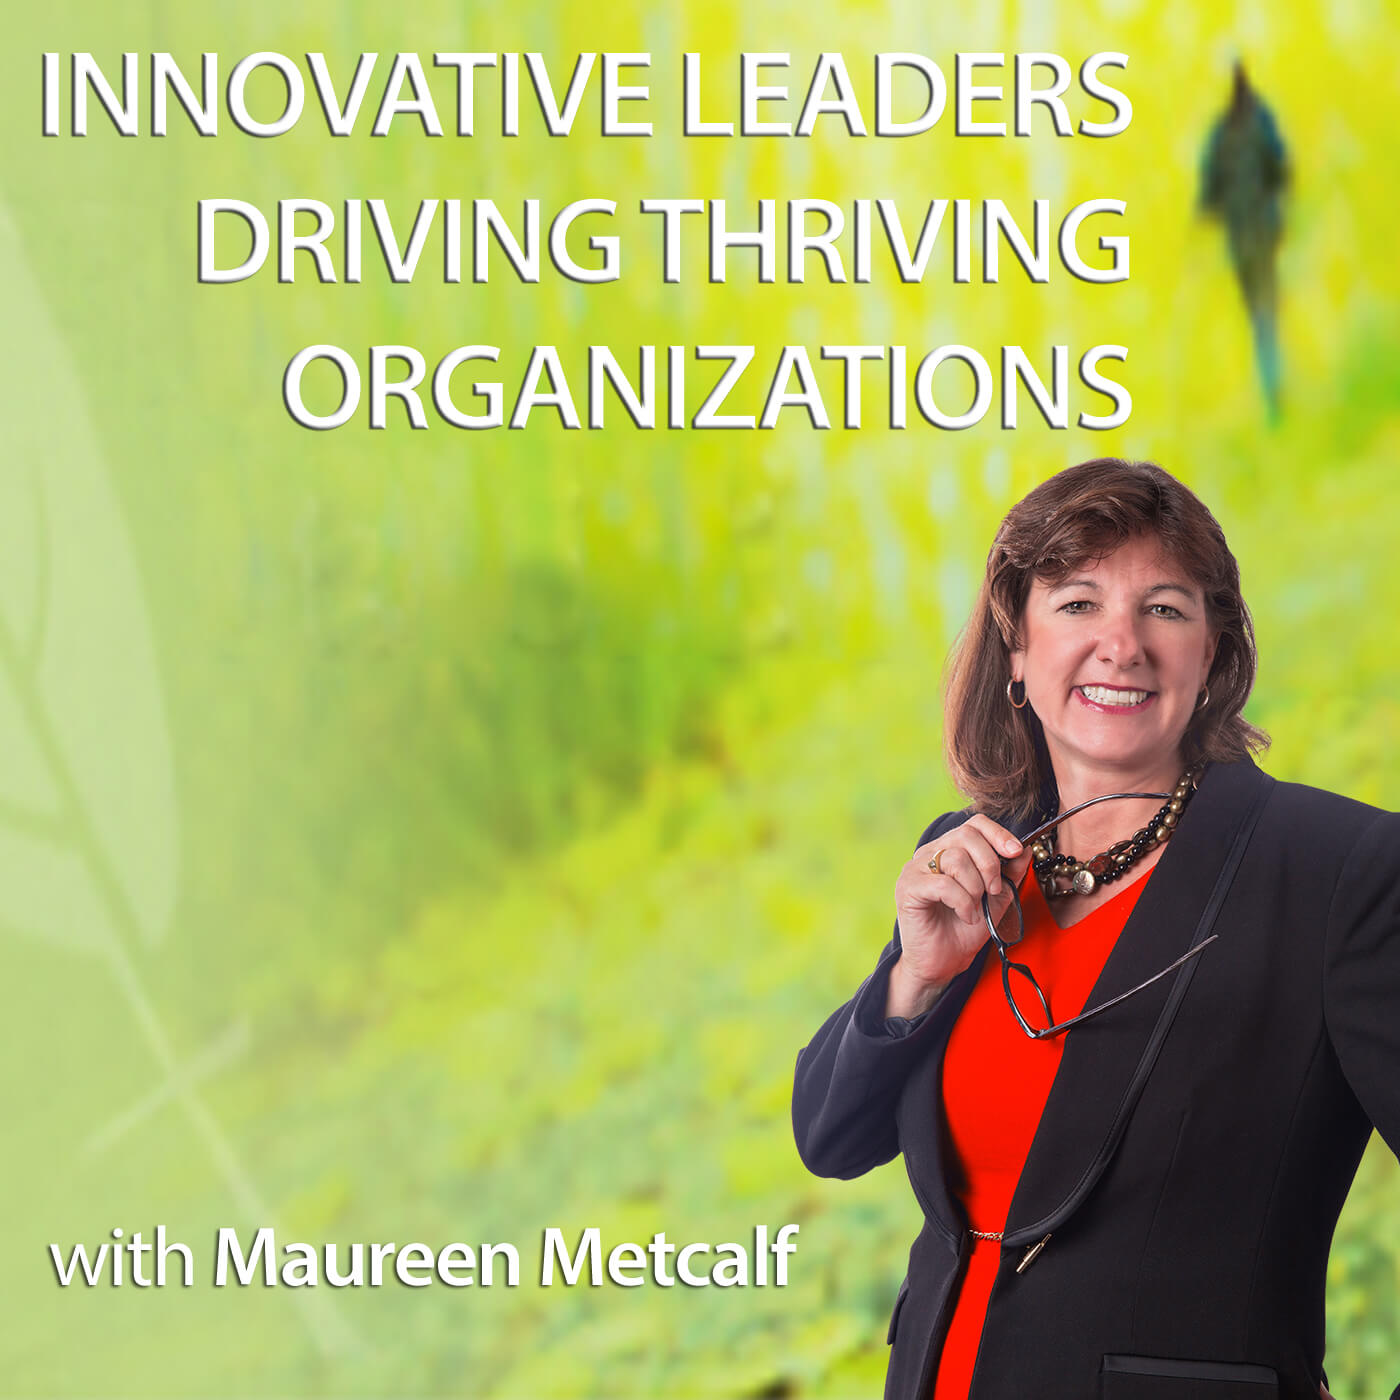 How do Identity and Cultural Difference Impact Leadership? By Maureen Metcalf